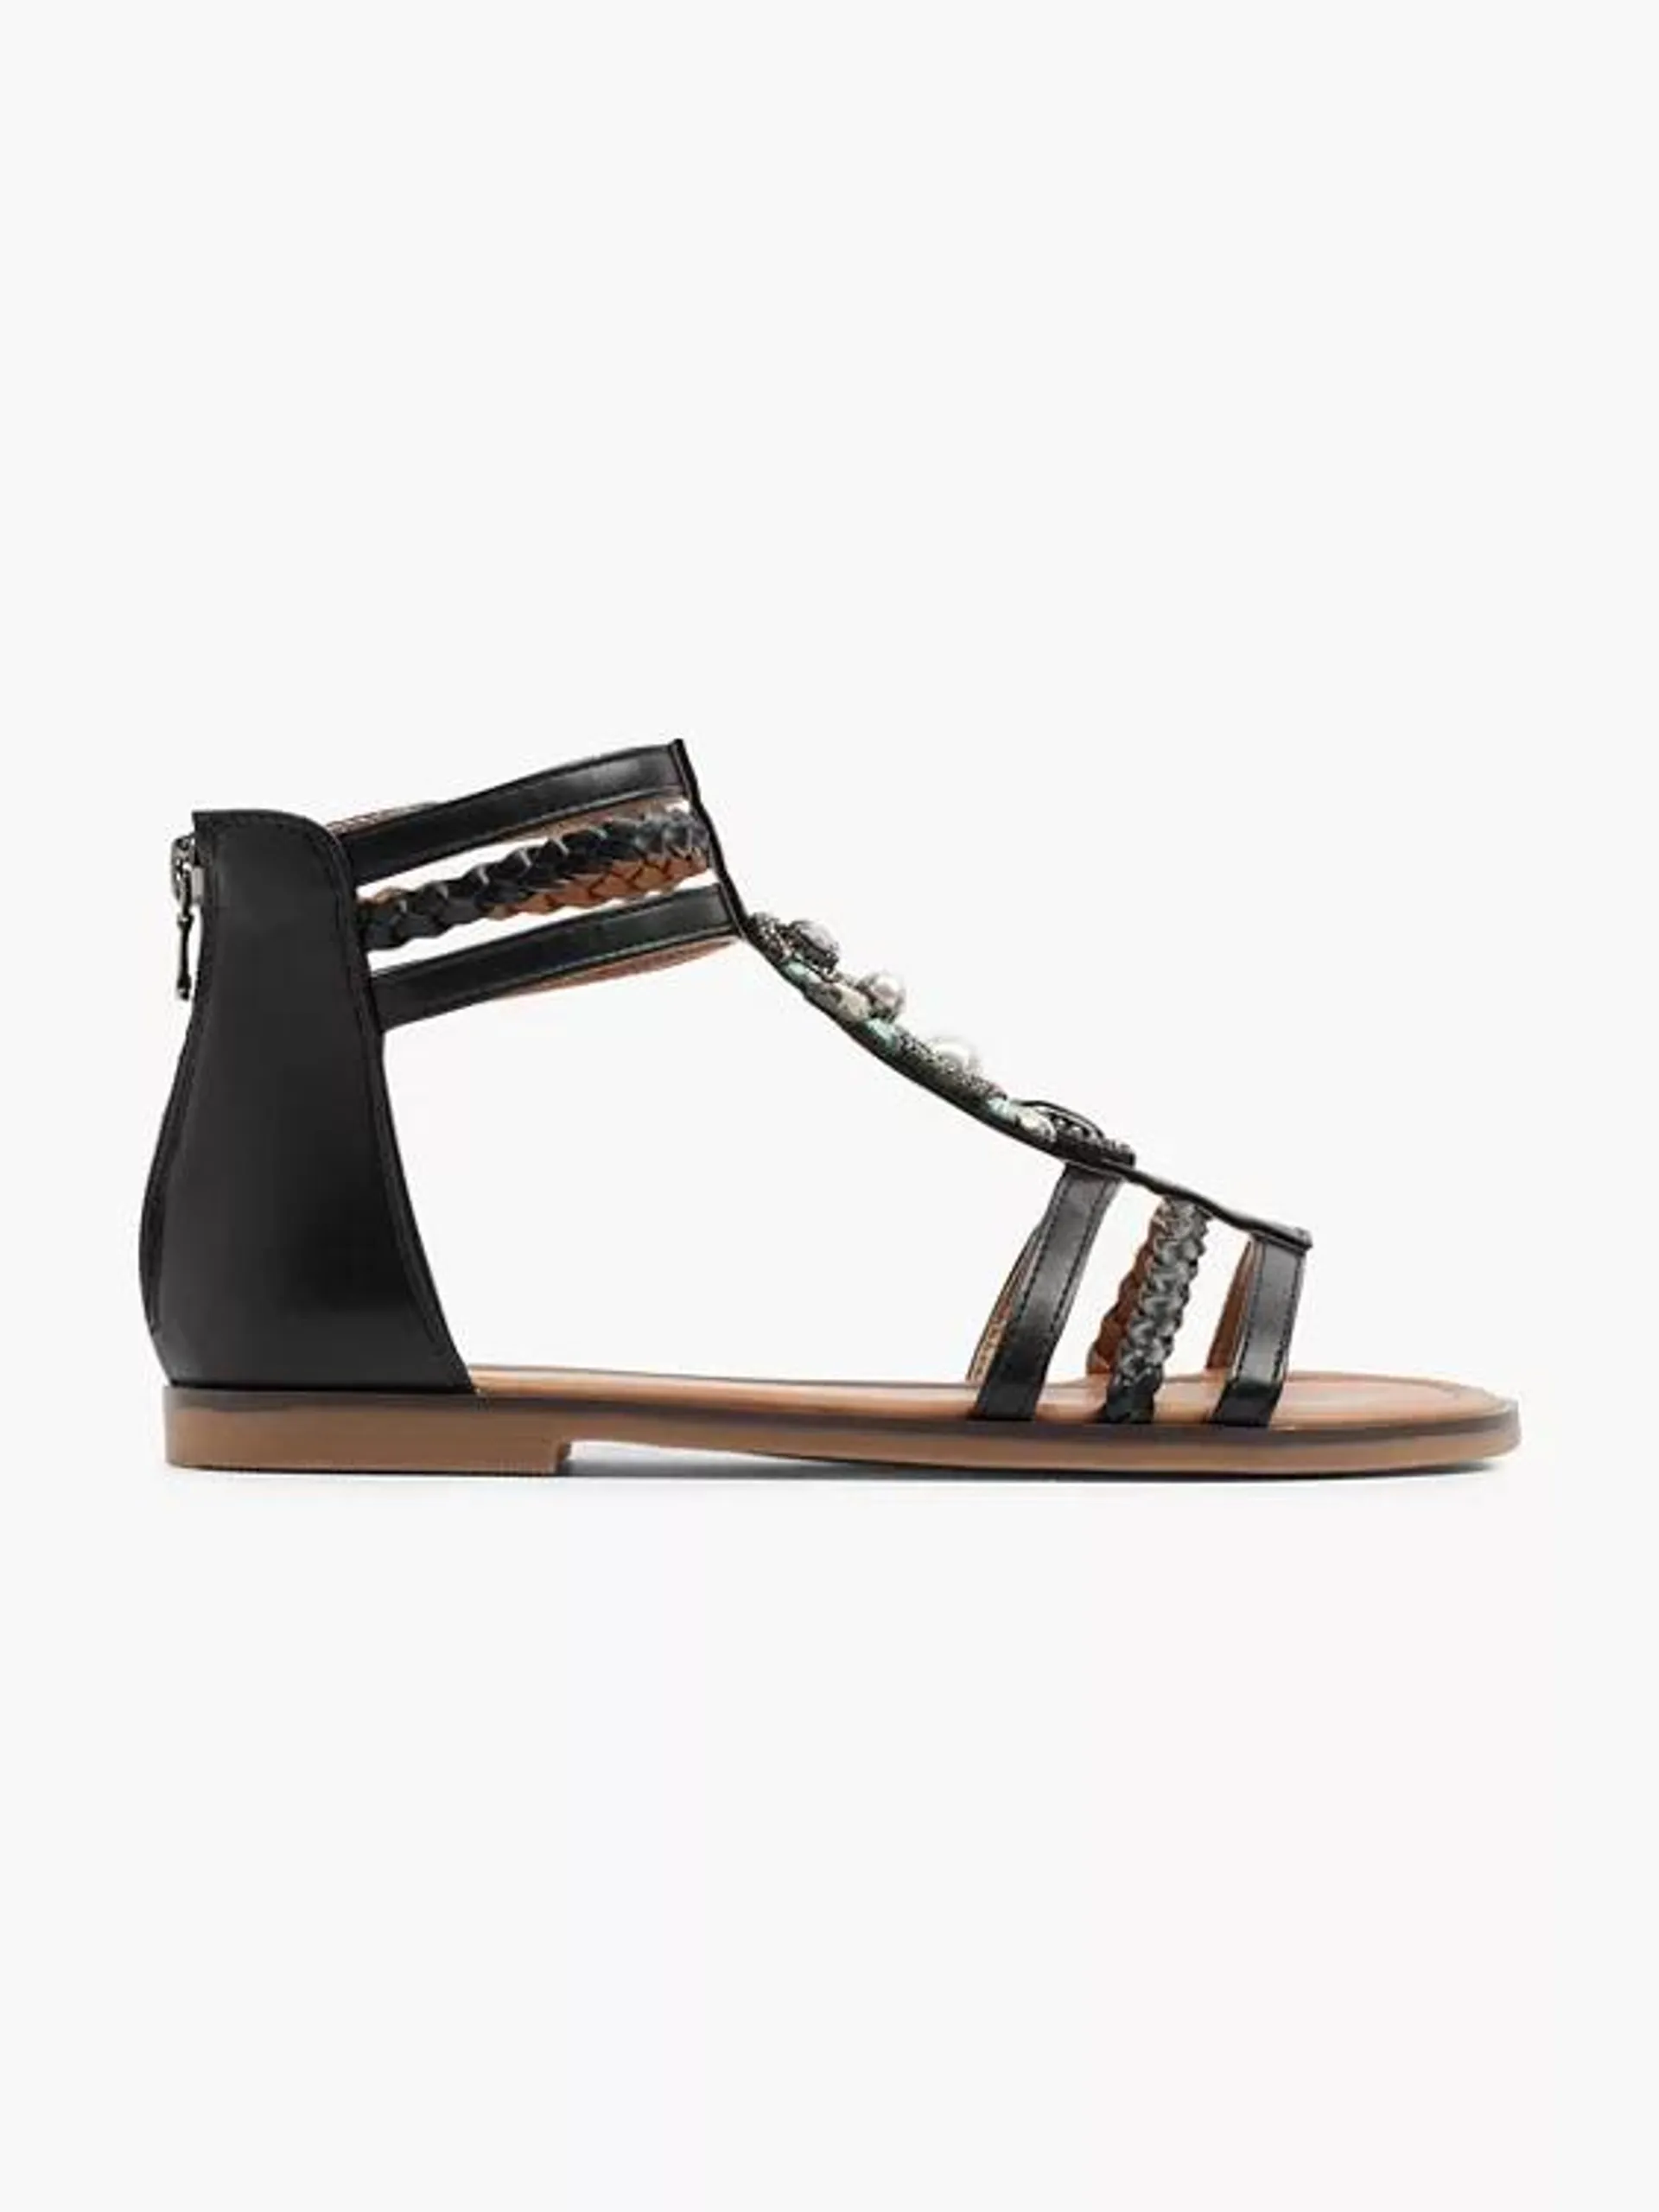 Black Braided Sandal with Ankle Strap and Gem Detail